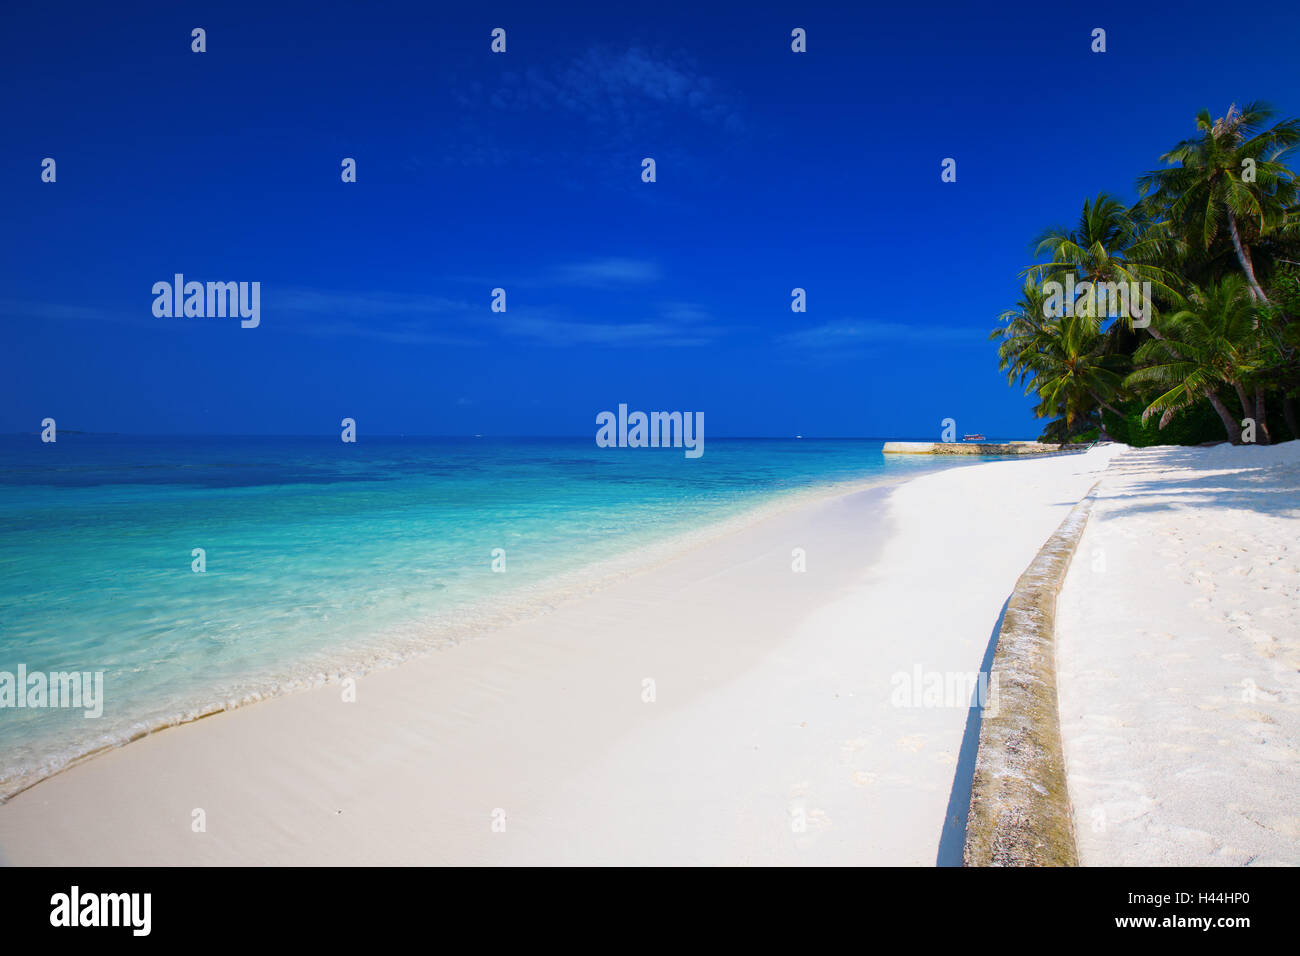 Tropical island with sandy beach with palm trees and turquoise clear water in Maldives Stock Photo